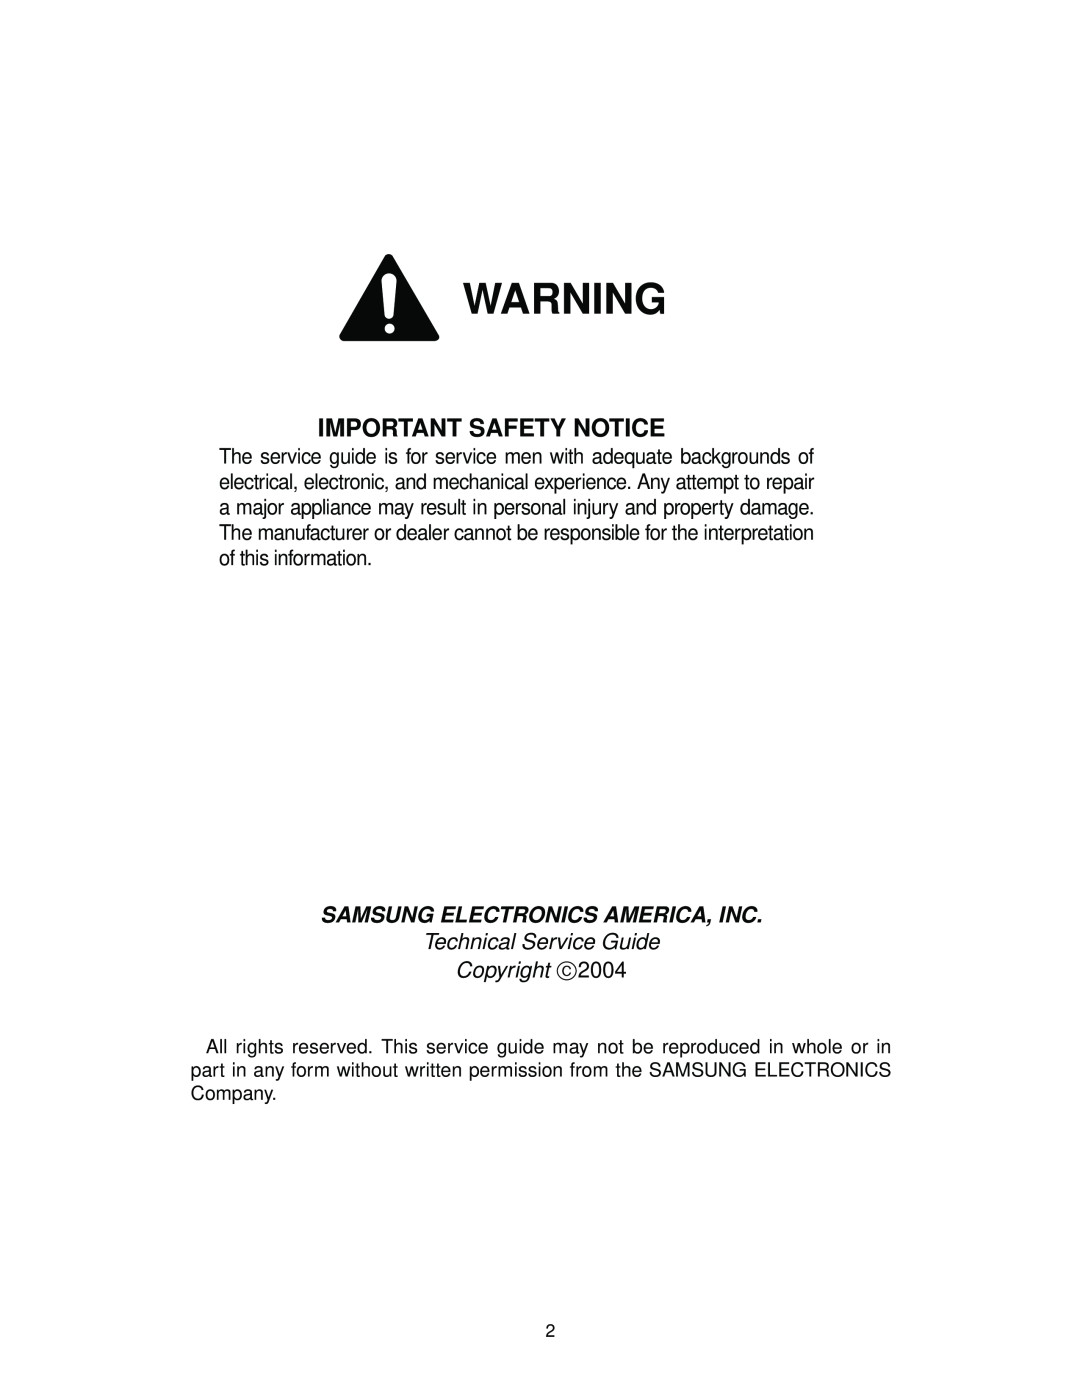 Samsung RS2*3* manual Important Safety Notice, Samsung Electronics America, Inc, Technical Service Guide Copyright 